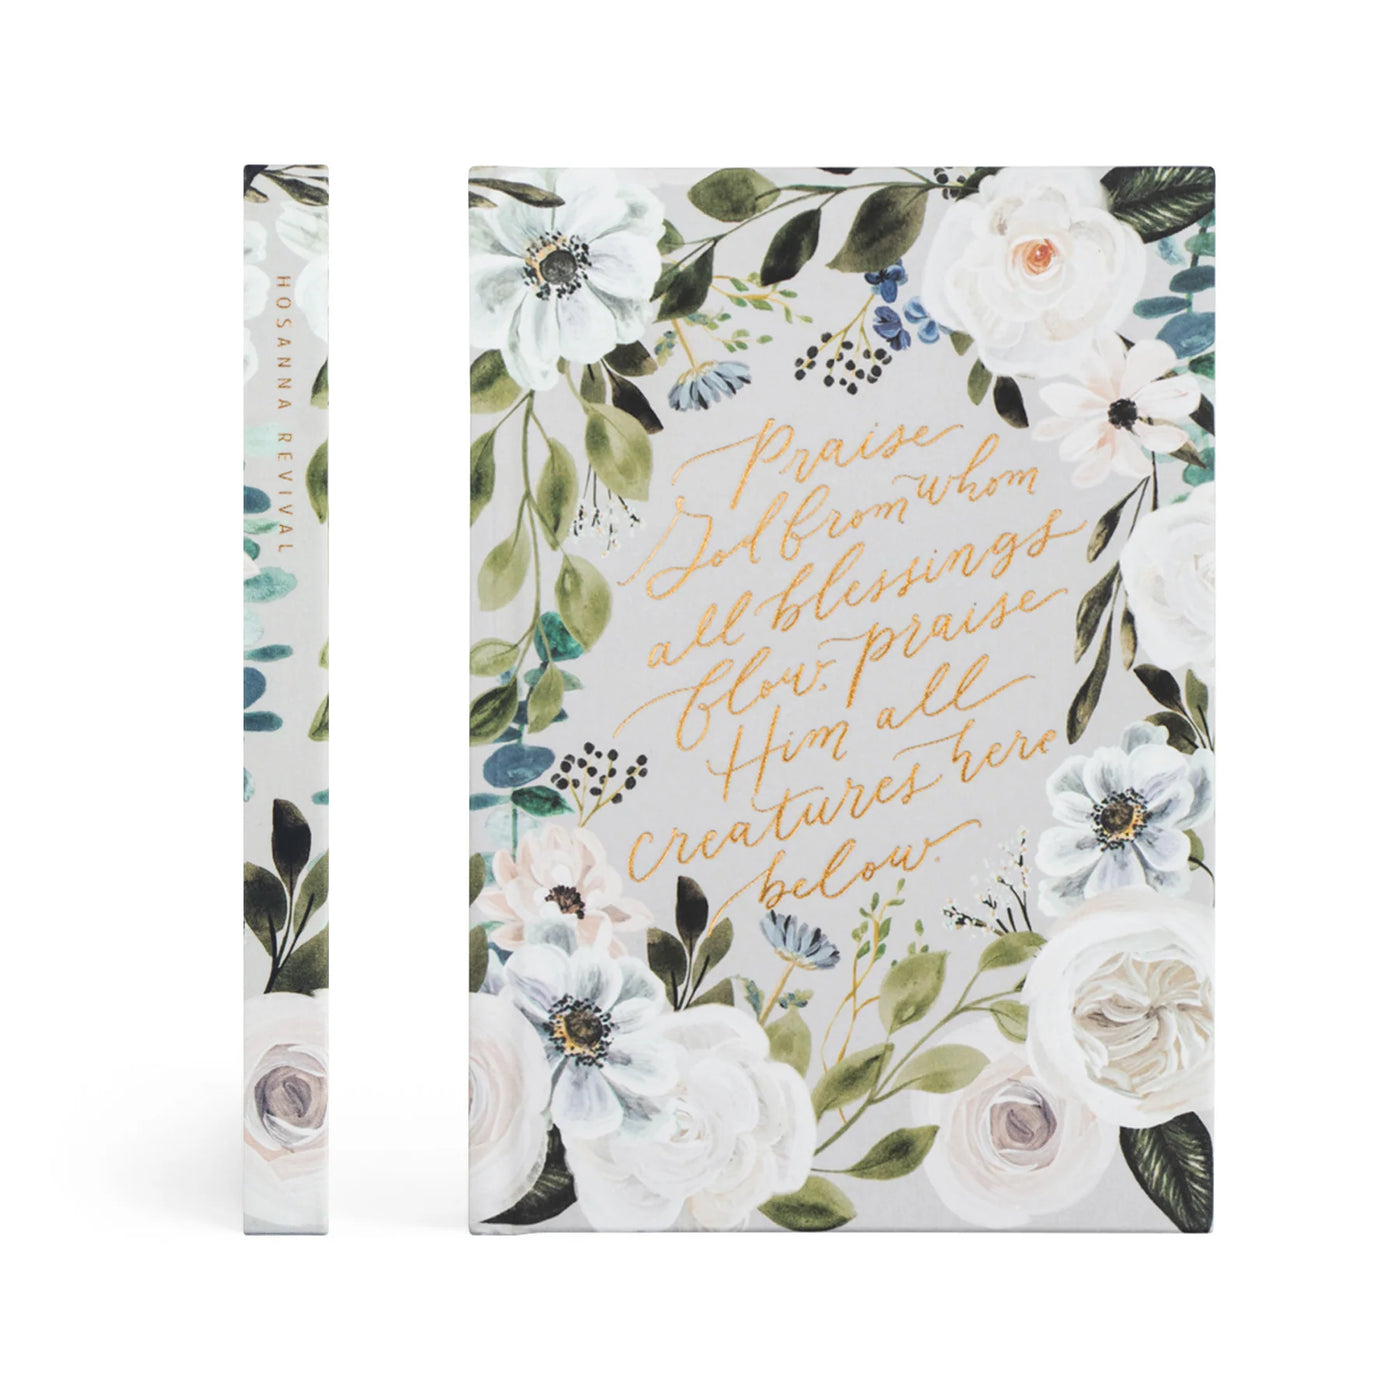 Hosanna Revival Notebook : Victoria Theme-402 MISC GIFTS-Hosanna Revival-Adelyn Elaine's Boutique, Women's Clothing Boutique in Gilmer, TX